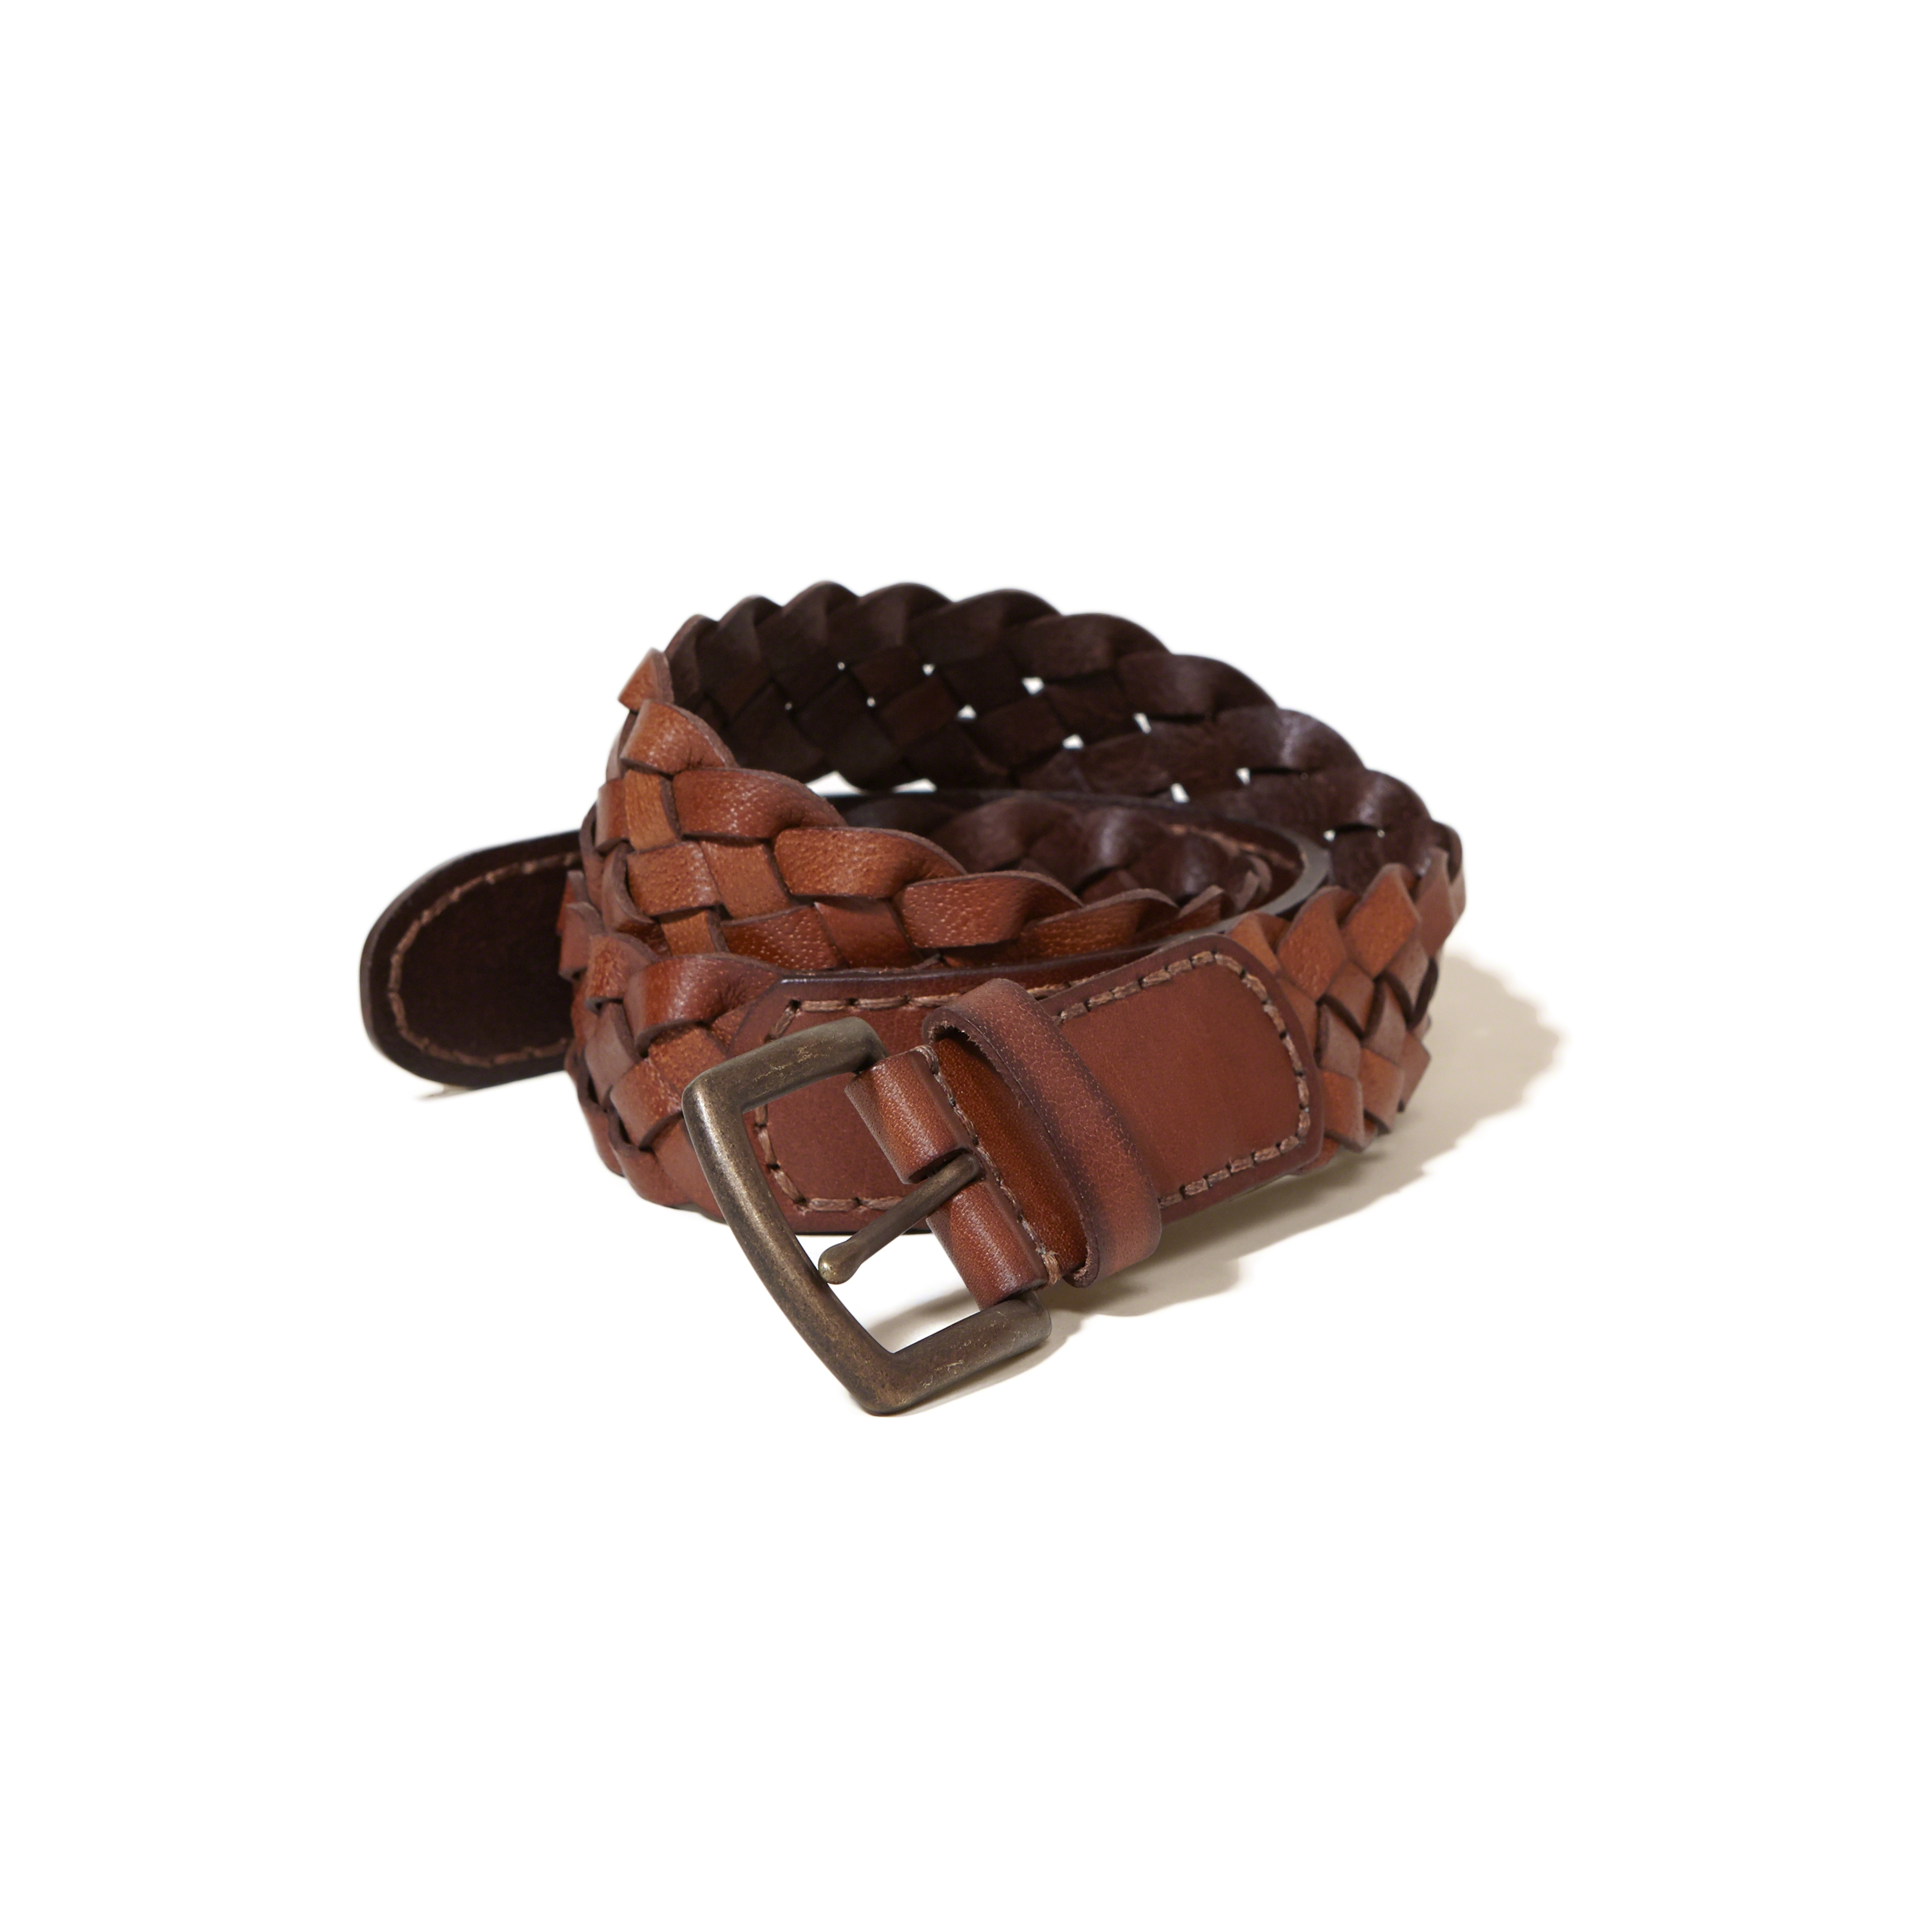 Lyst - Hollister Braided Leather Belt in Brown for Men